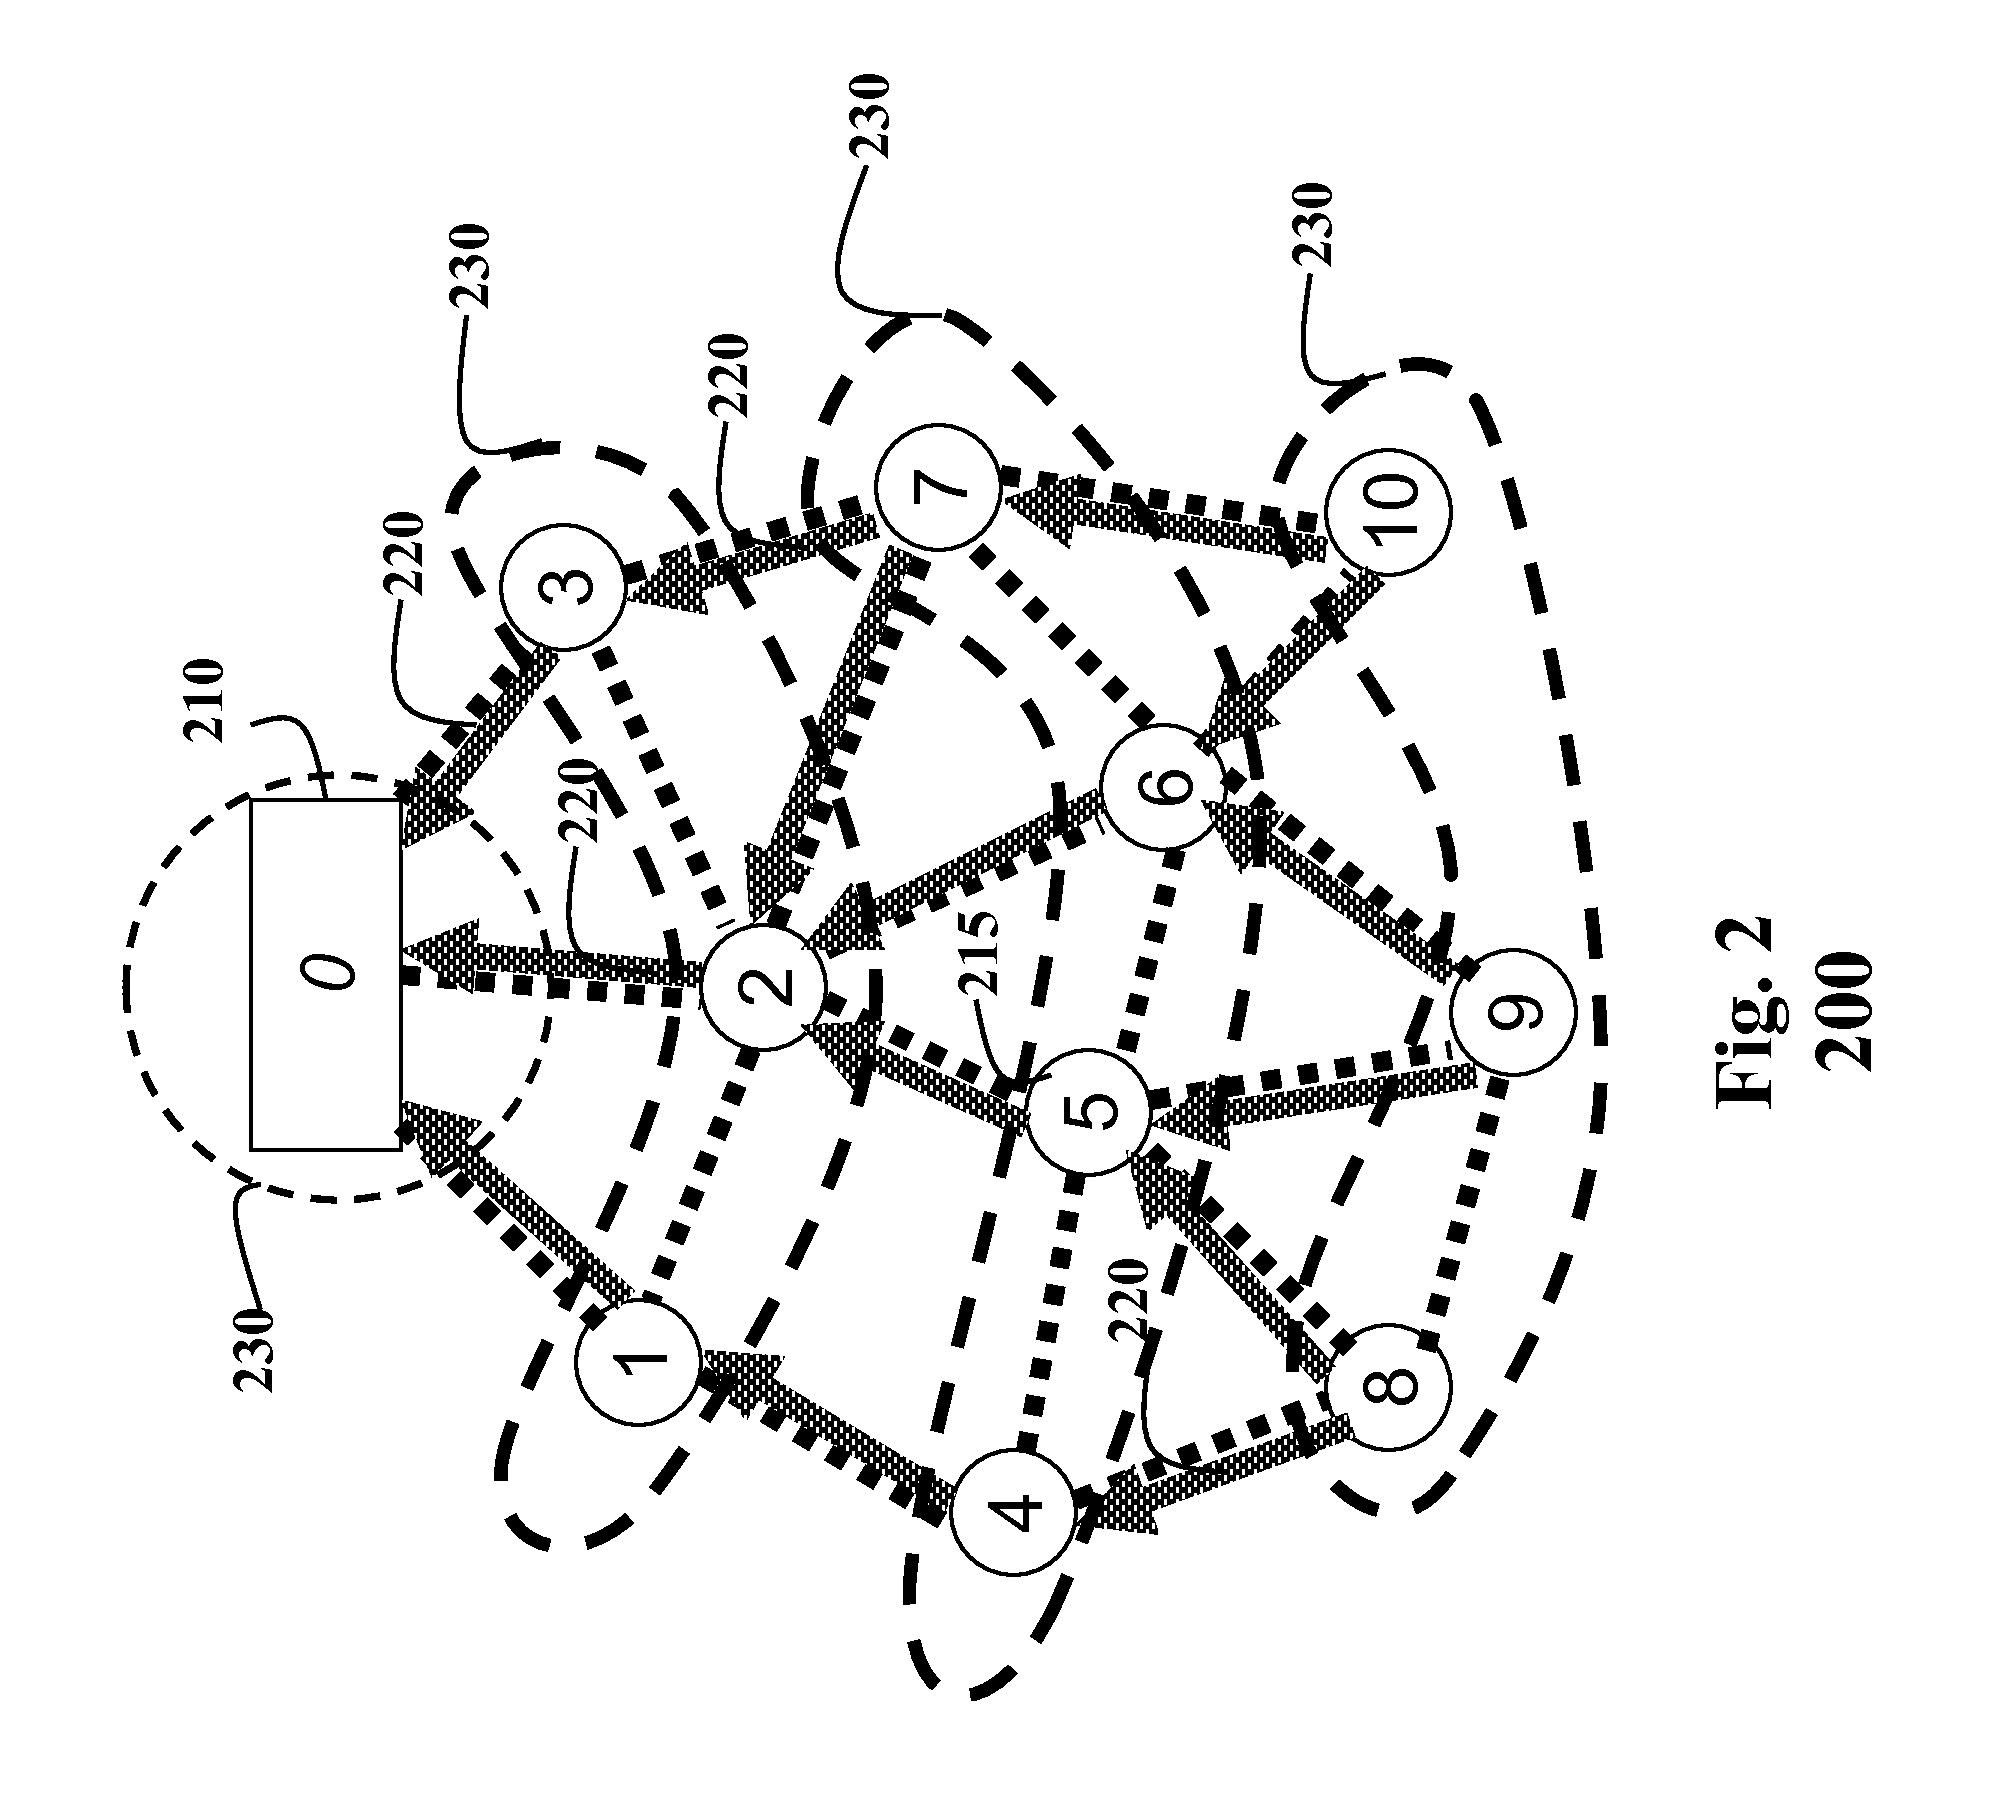 Ranking Nodes in Networks with Topologies Arranged as Directed Acyclic Graphs